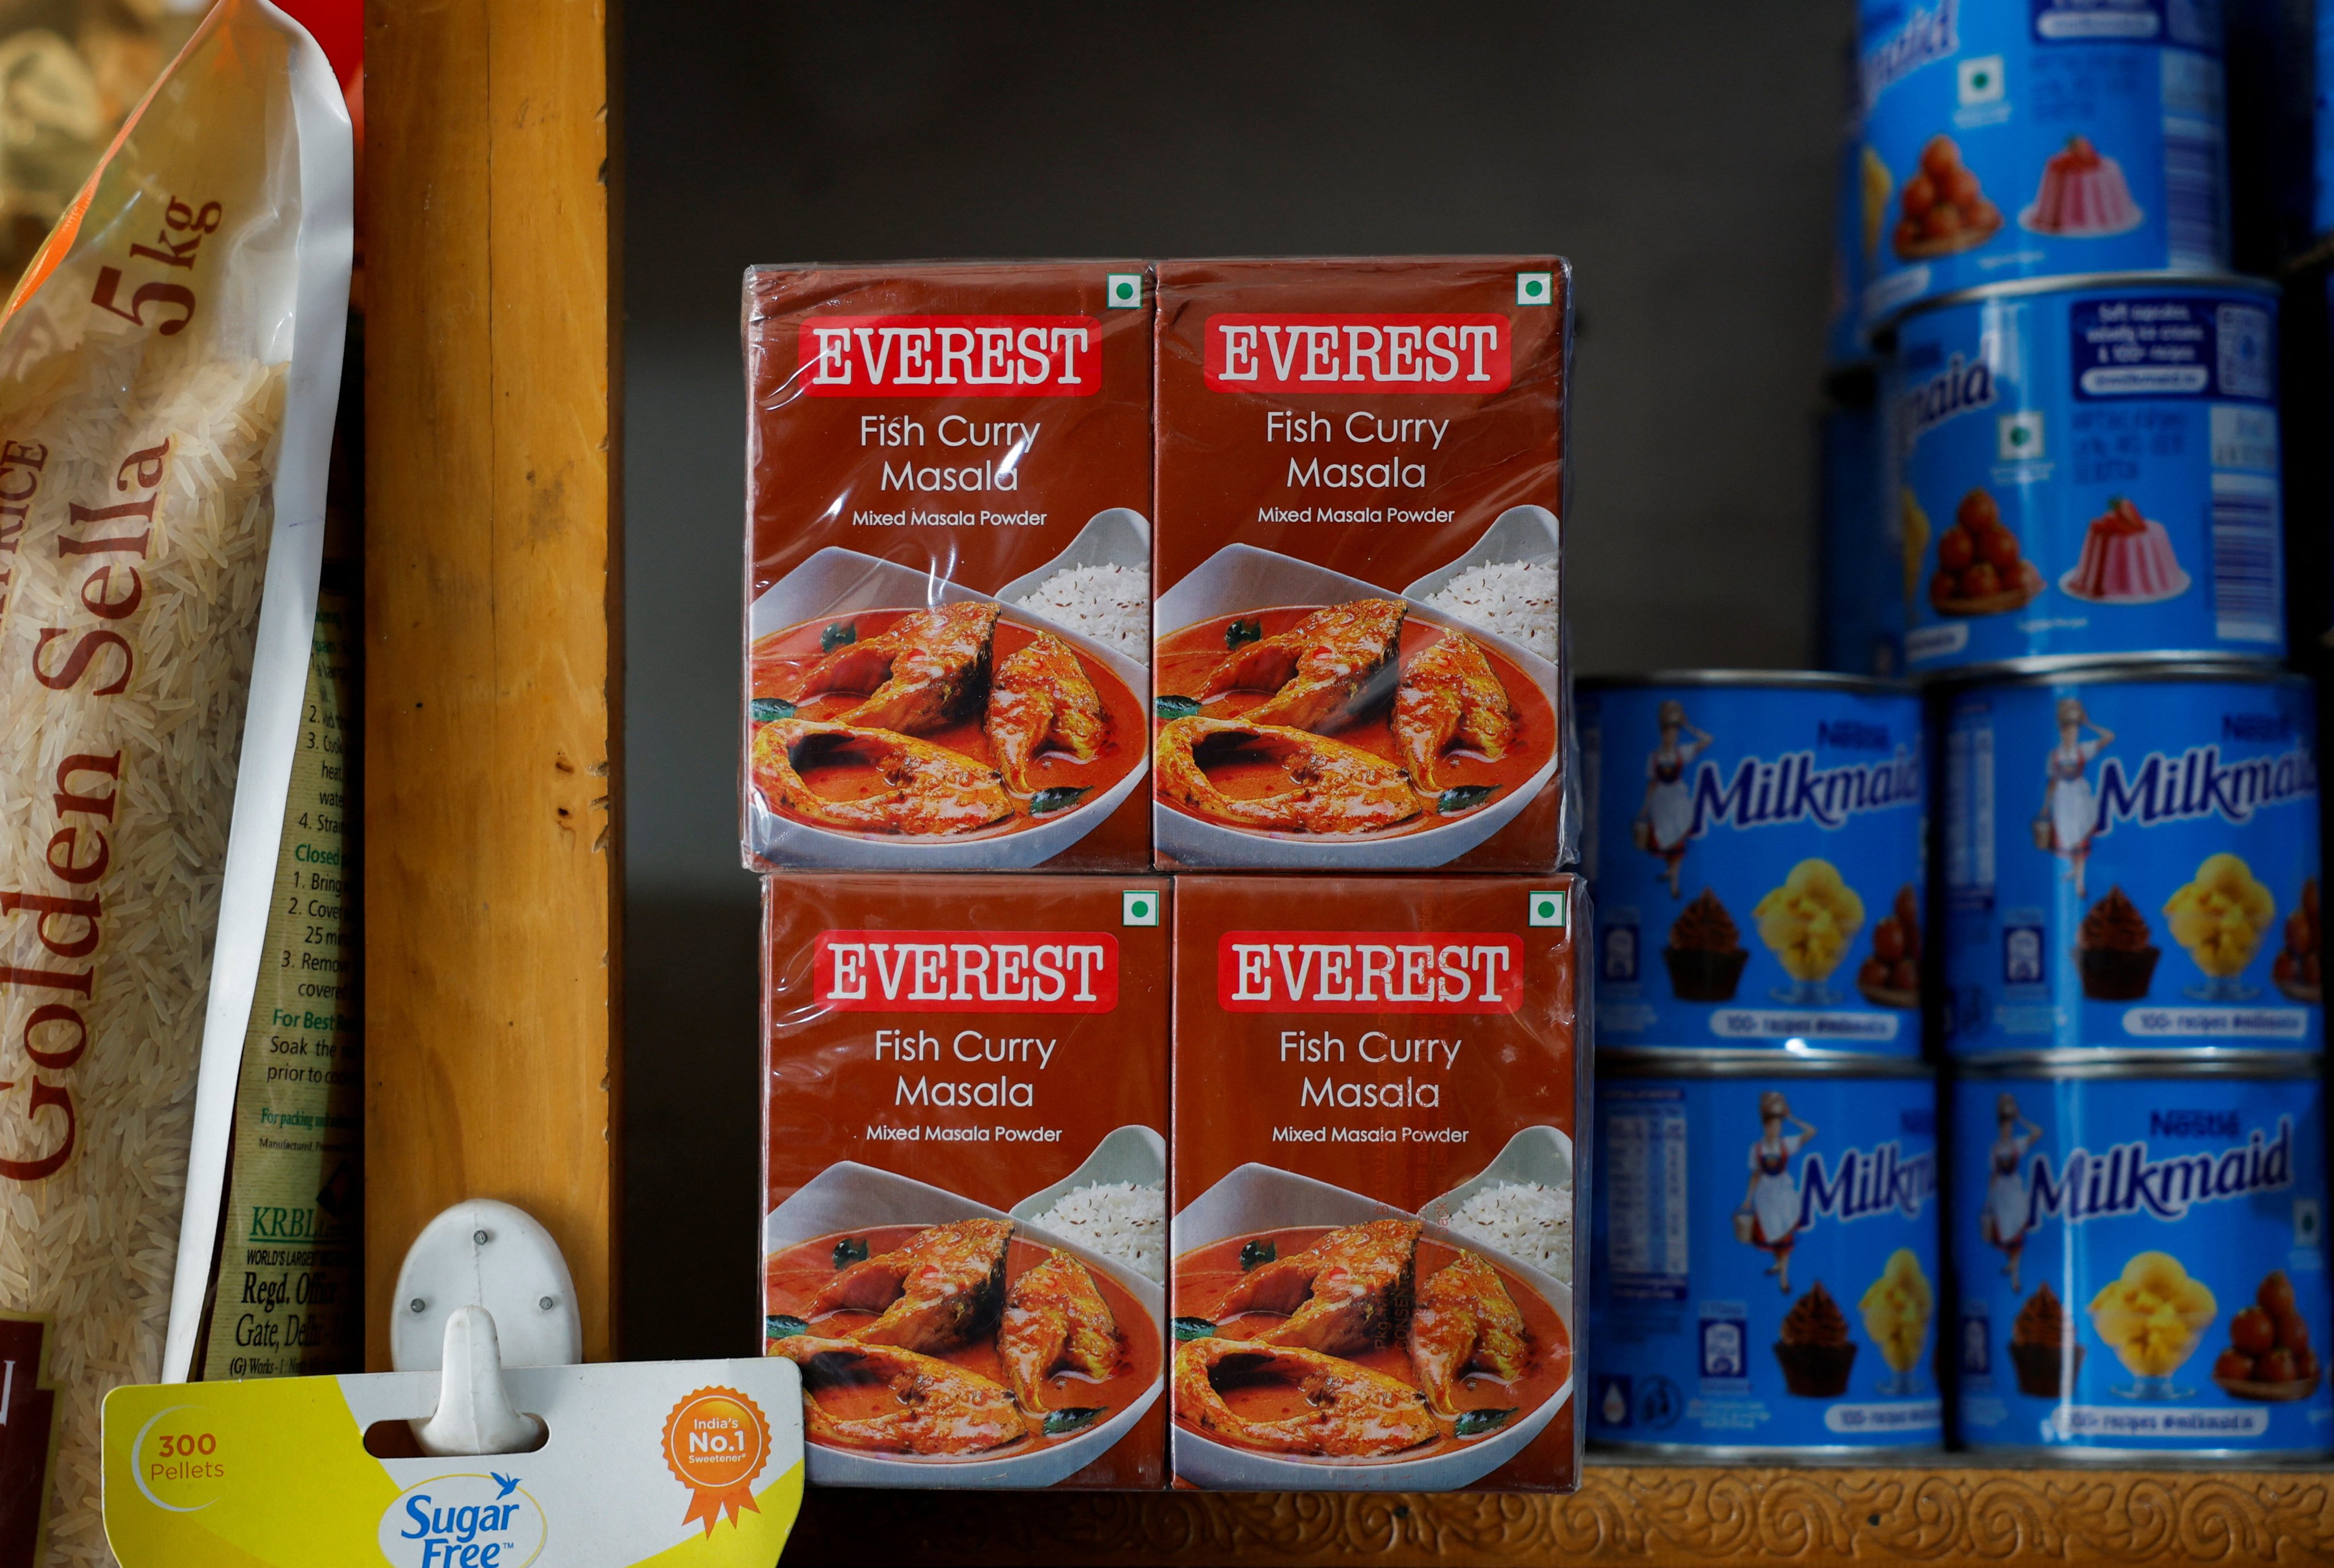 One of the products recalled was Everest fish curry masala. Photo: Reuters